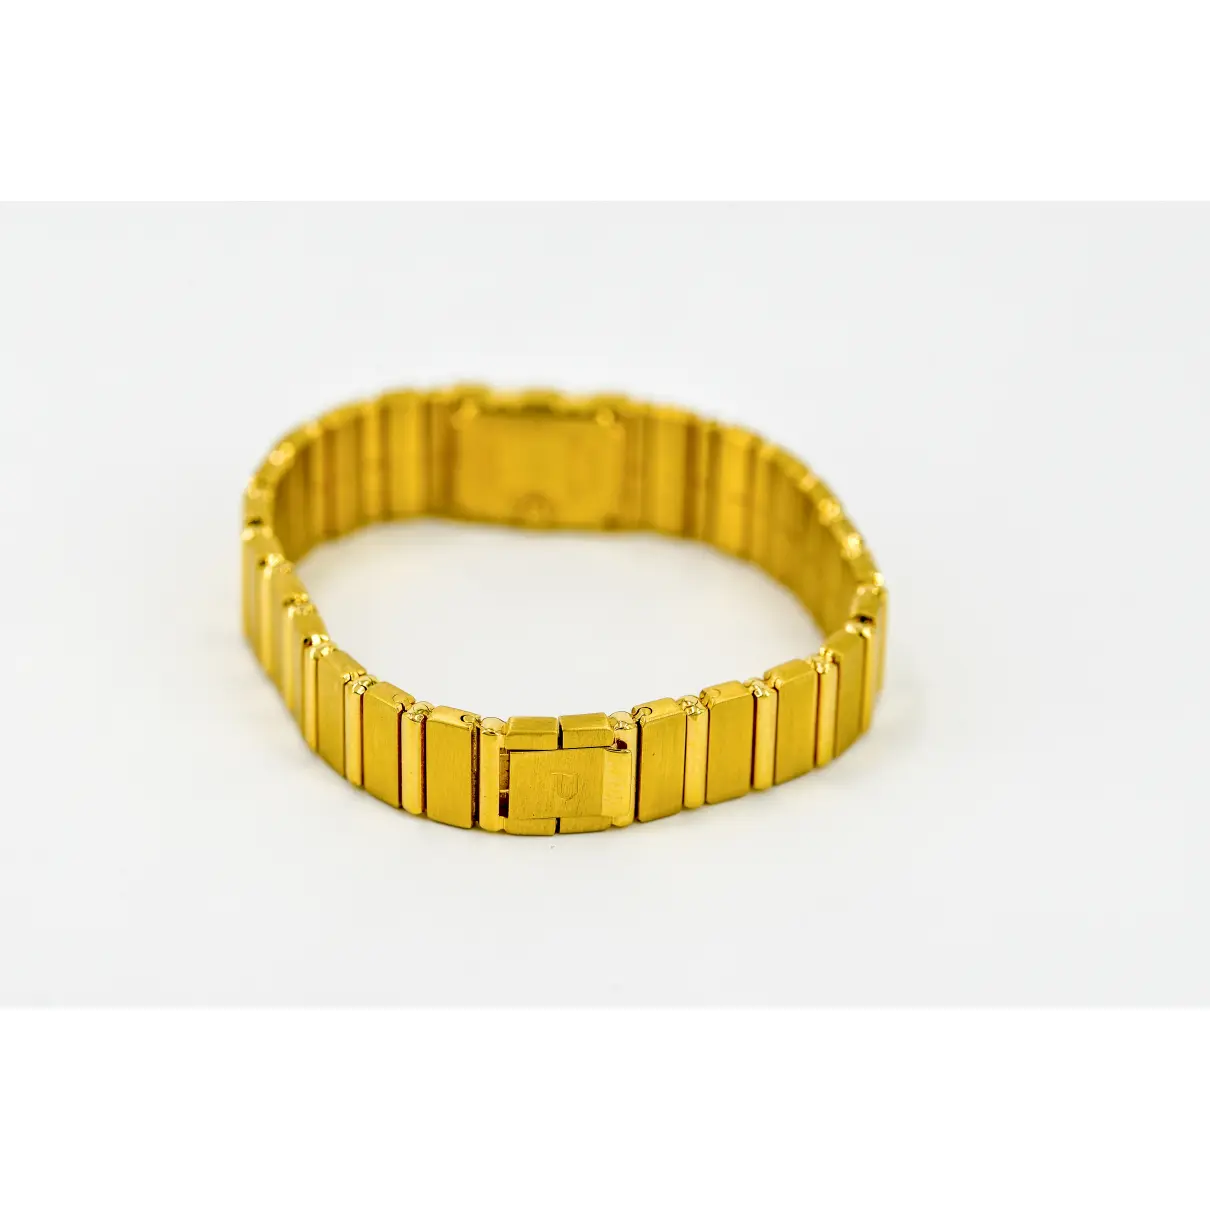 Buy Piaget Yellow gold watch online - Vintage